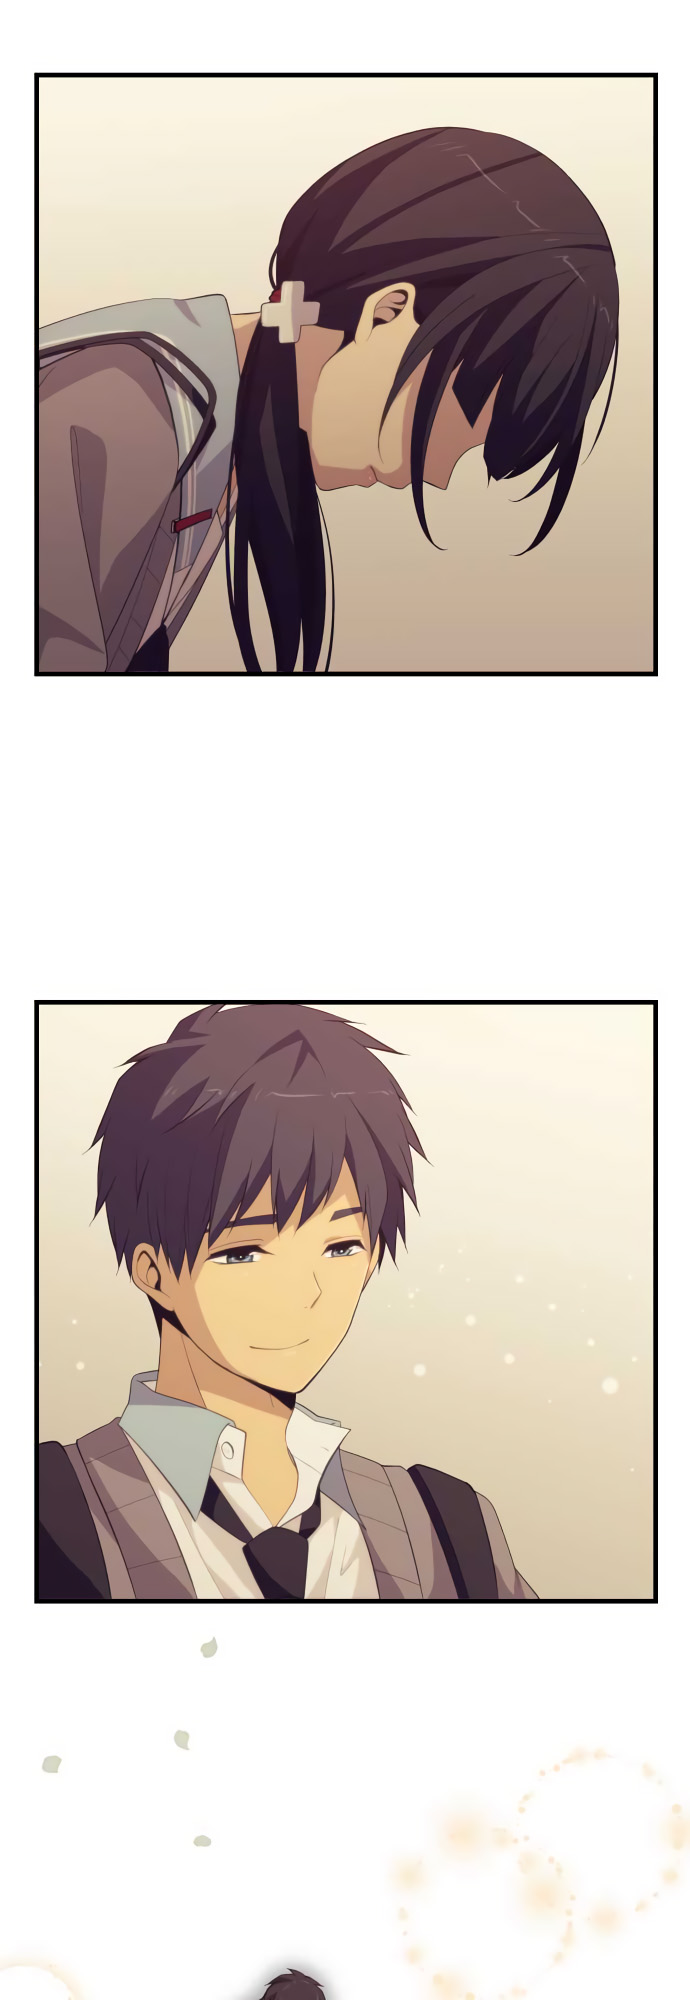 ReLIFE Ch. 212 Thank You, See You Again Sometime